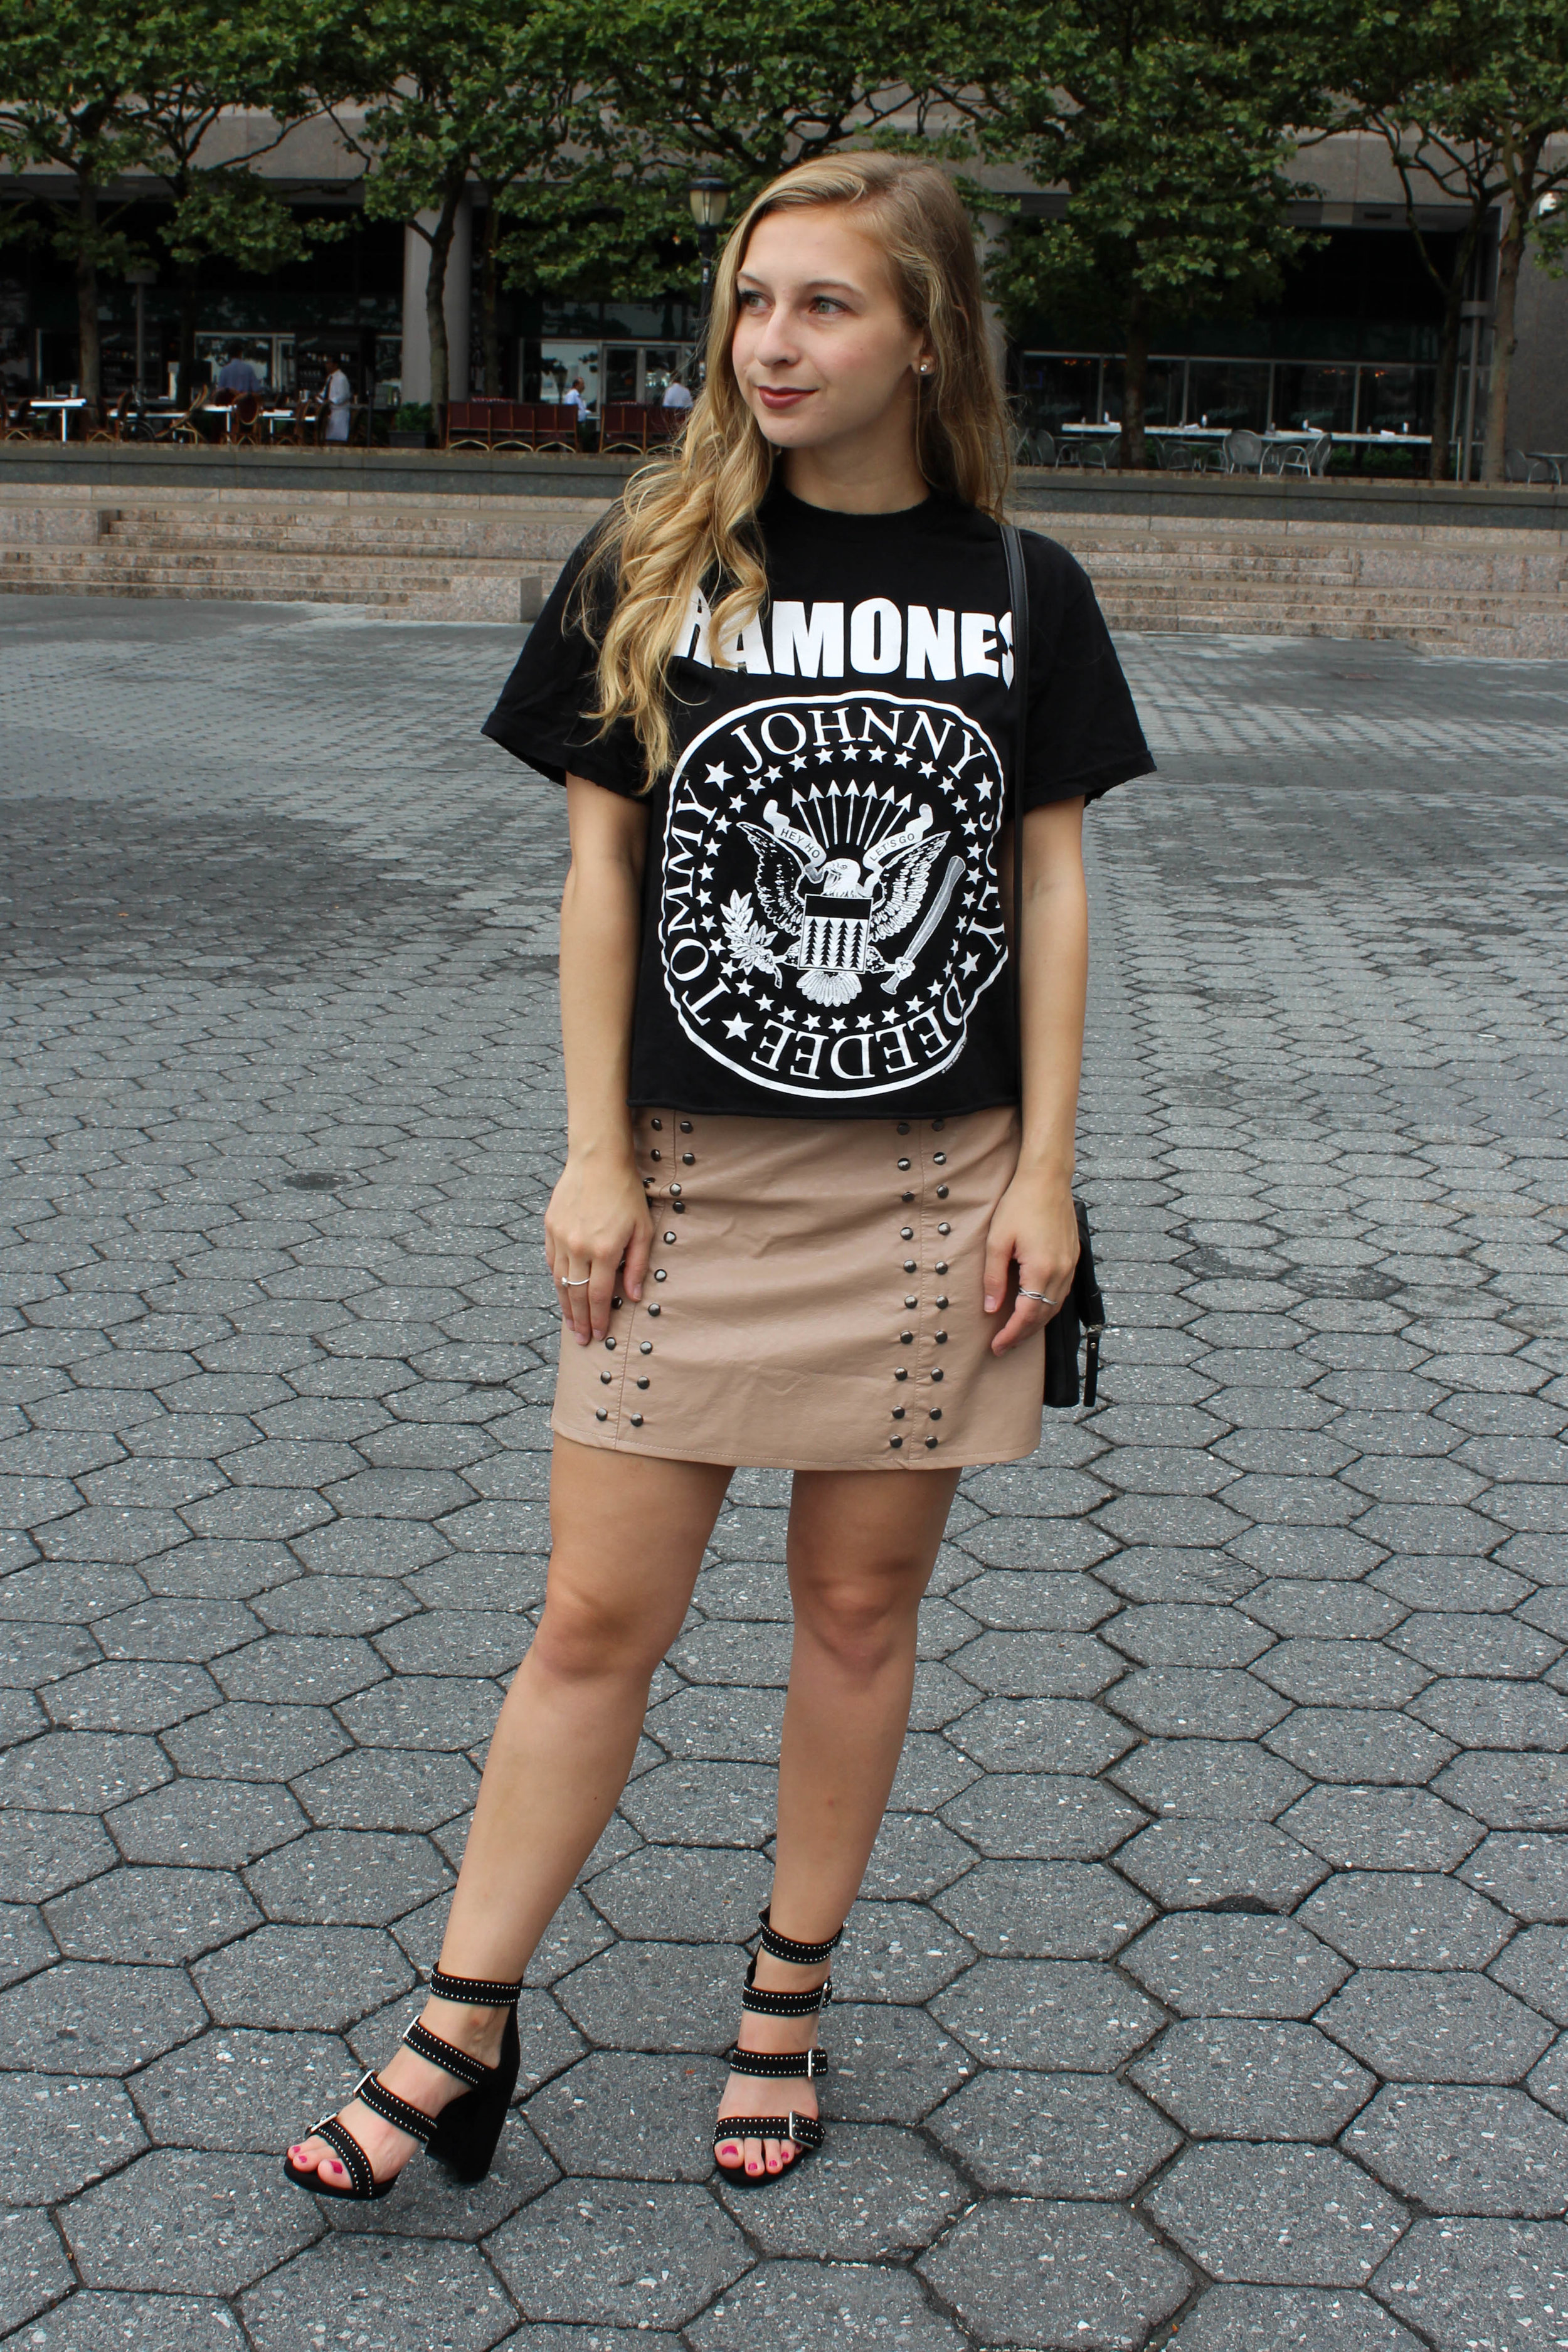 The Perfect Pair: Graphic Tees and Skirts